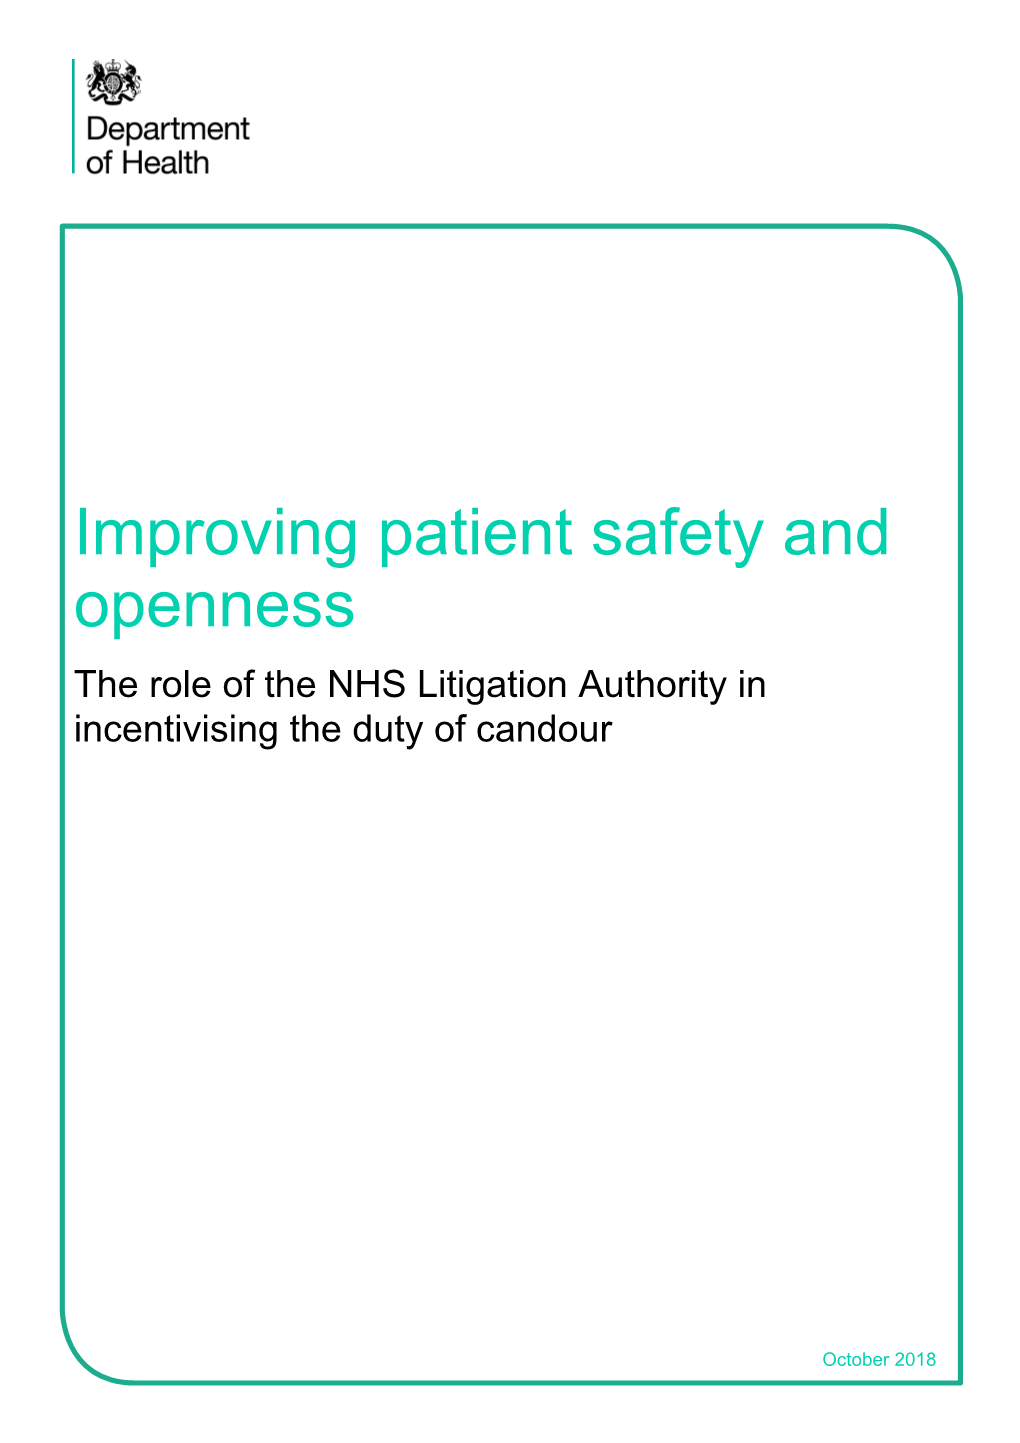 The Role of the NHS Litigation Authority in Incentivising the Duty of Candour